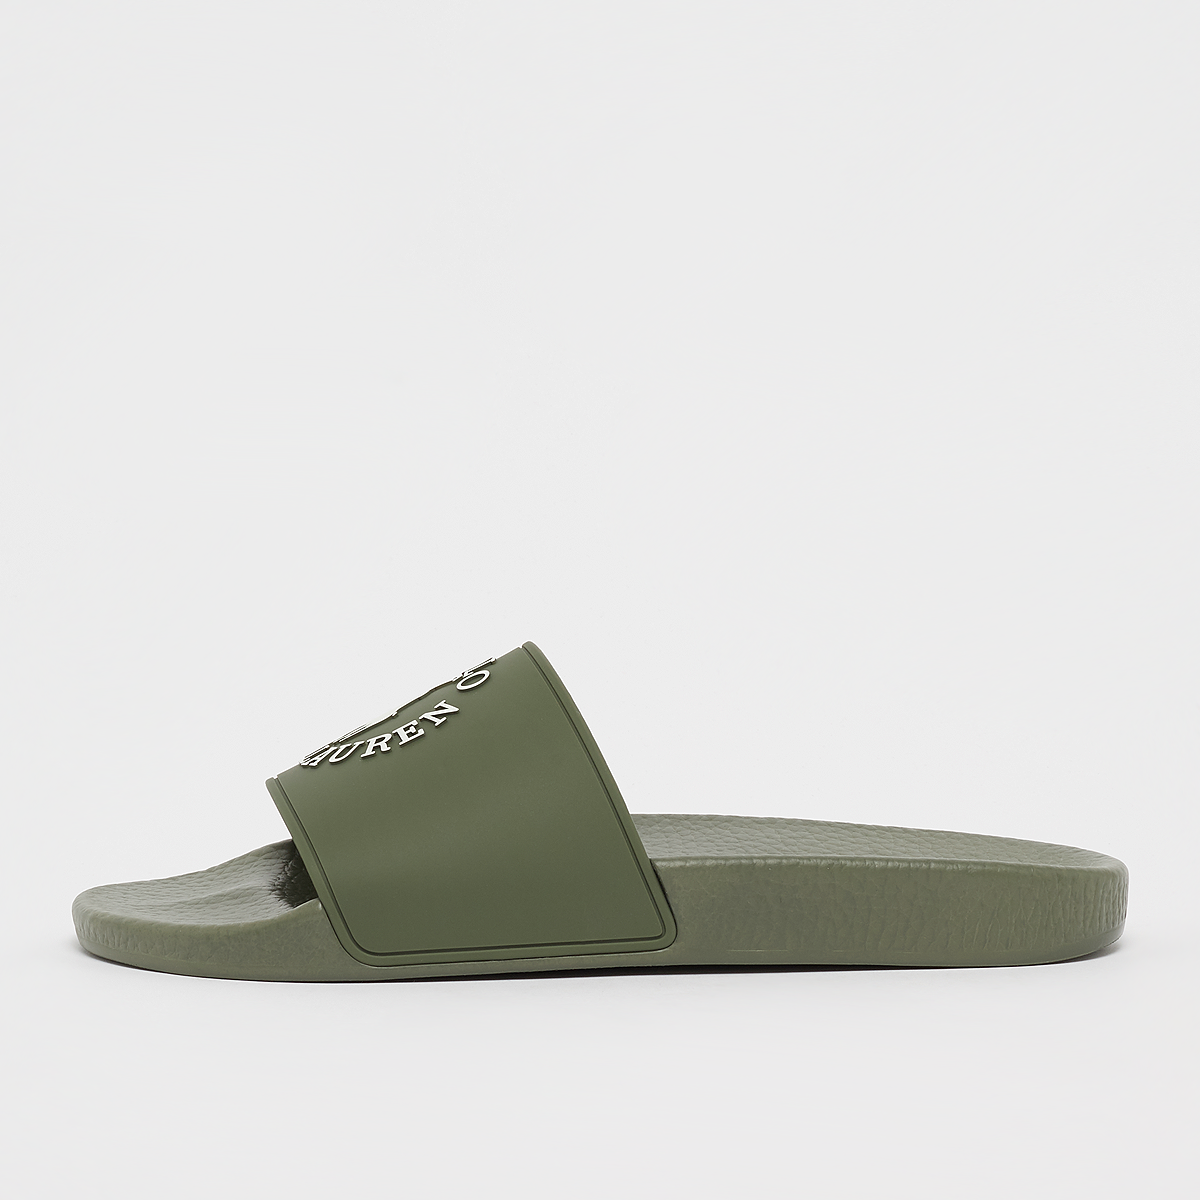 polo ralph lauren pool slide, sandales, chaussures, sage green/white, taille: 42, tailles disponibles:42,44,45,46